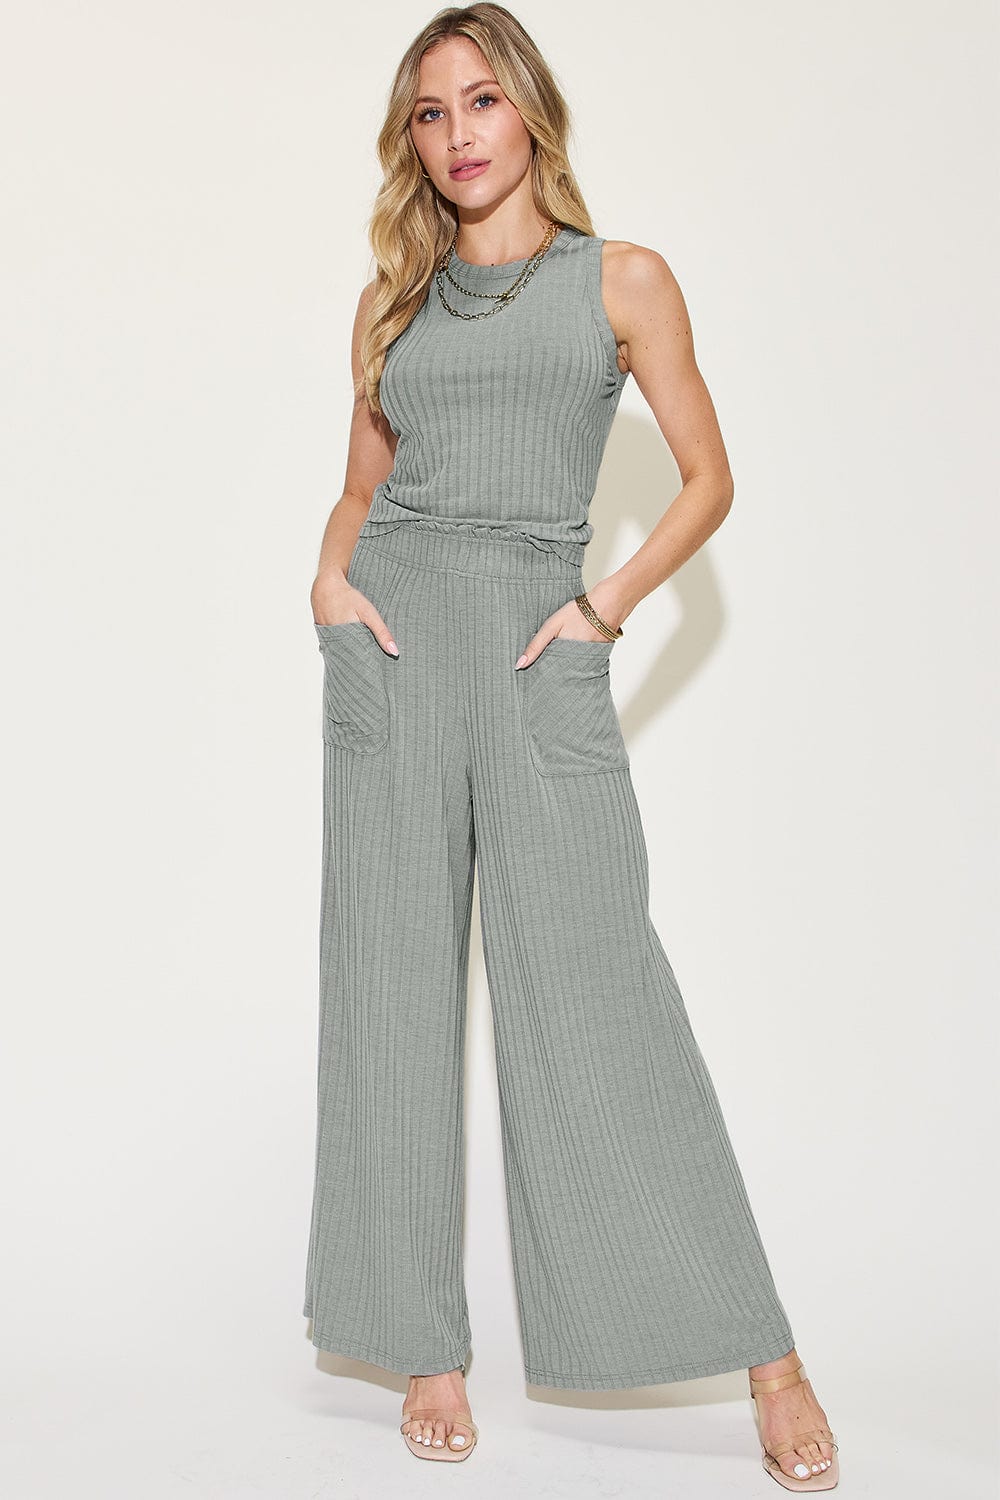 The802Gypsy clothing/outfit sets Gray / S ❤️GYPSY-Basic Bae-Tank and Wide Leg Pants Set